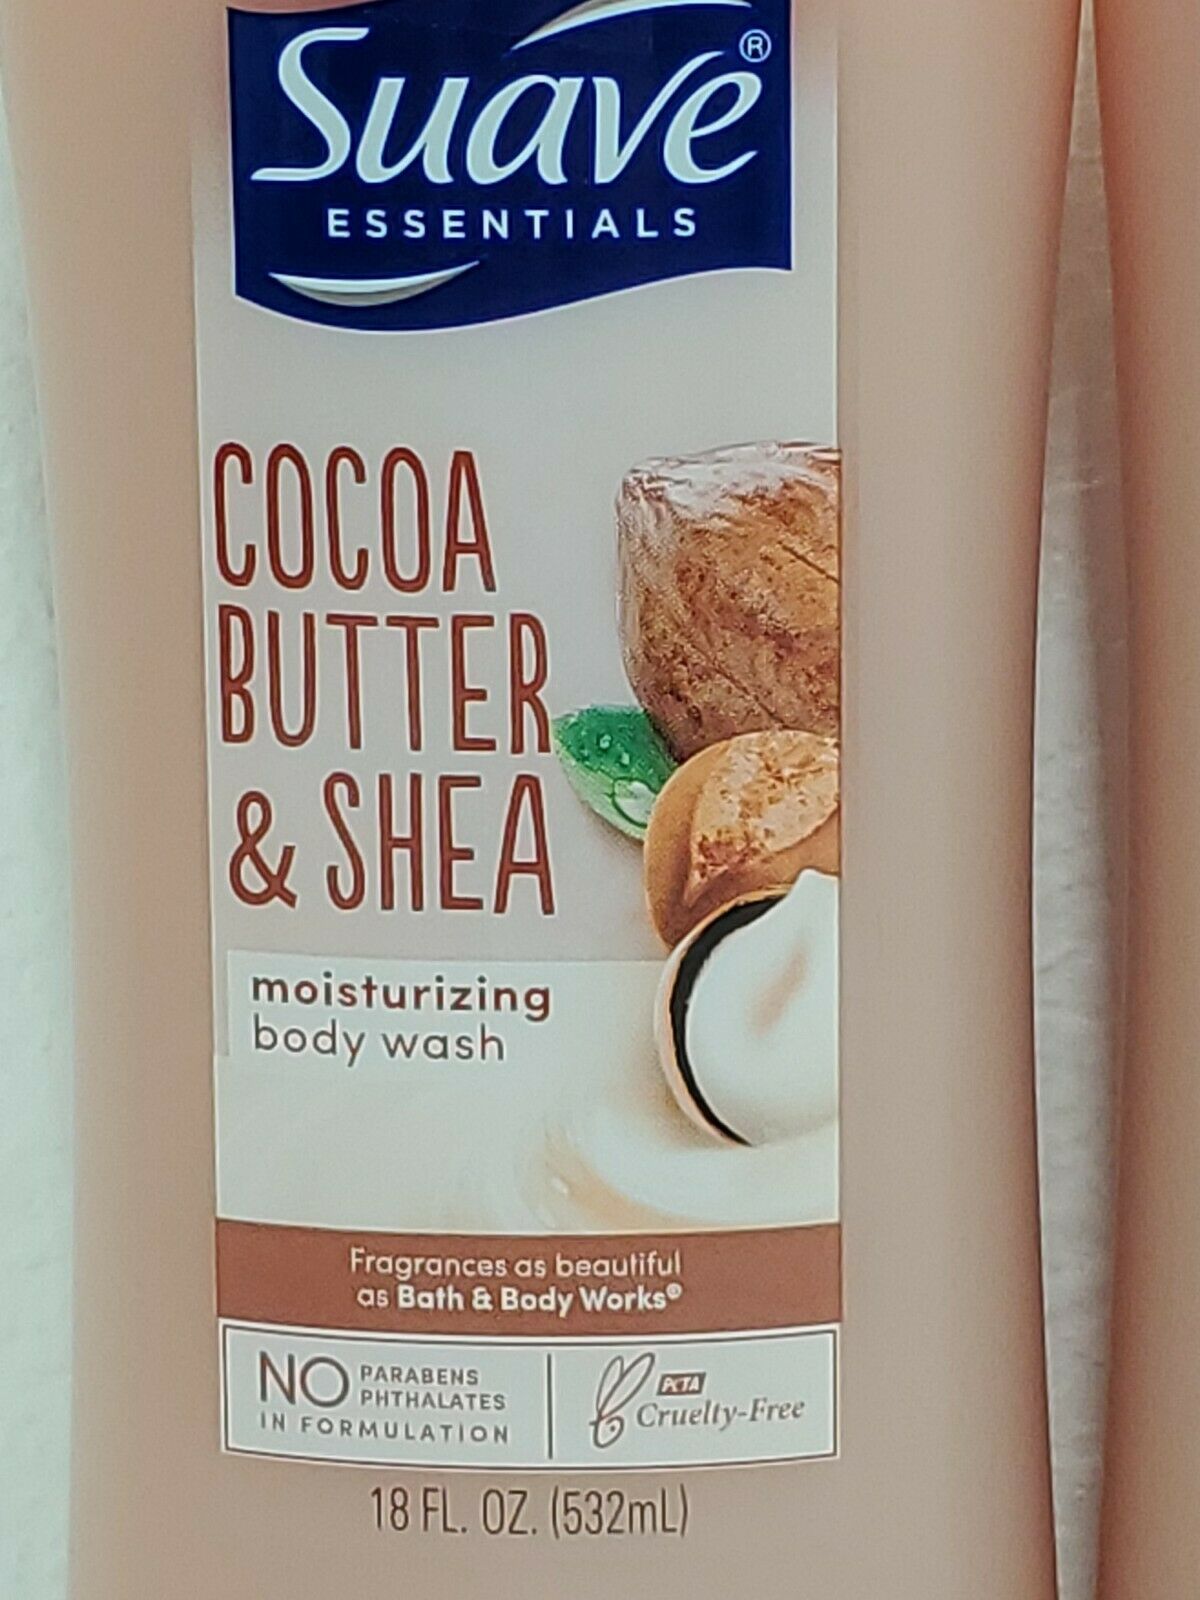 2 Suave Cocoa Butter And Shea Moisturizing Body Wash 18 Fl Oz Body Washes And Shower Gels